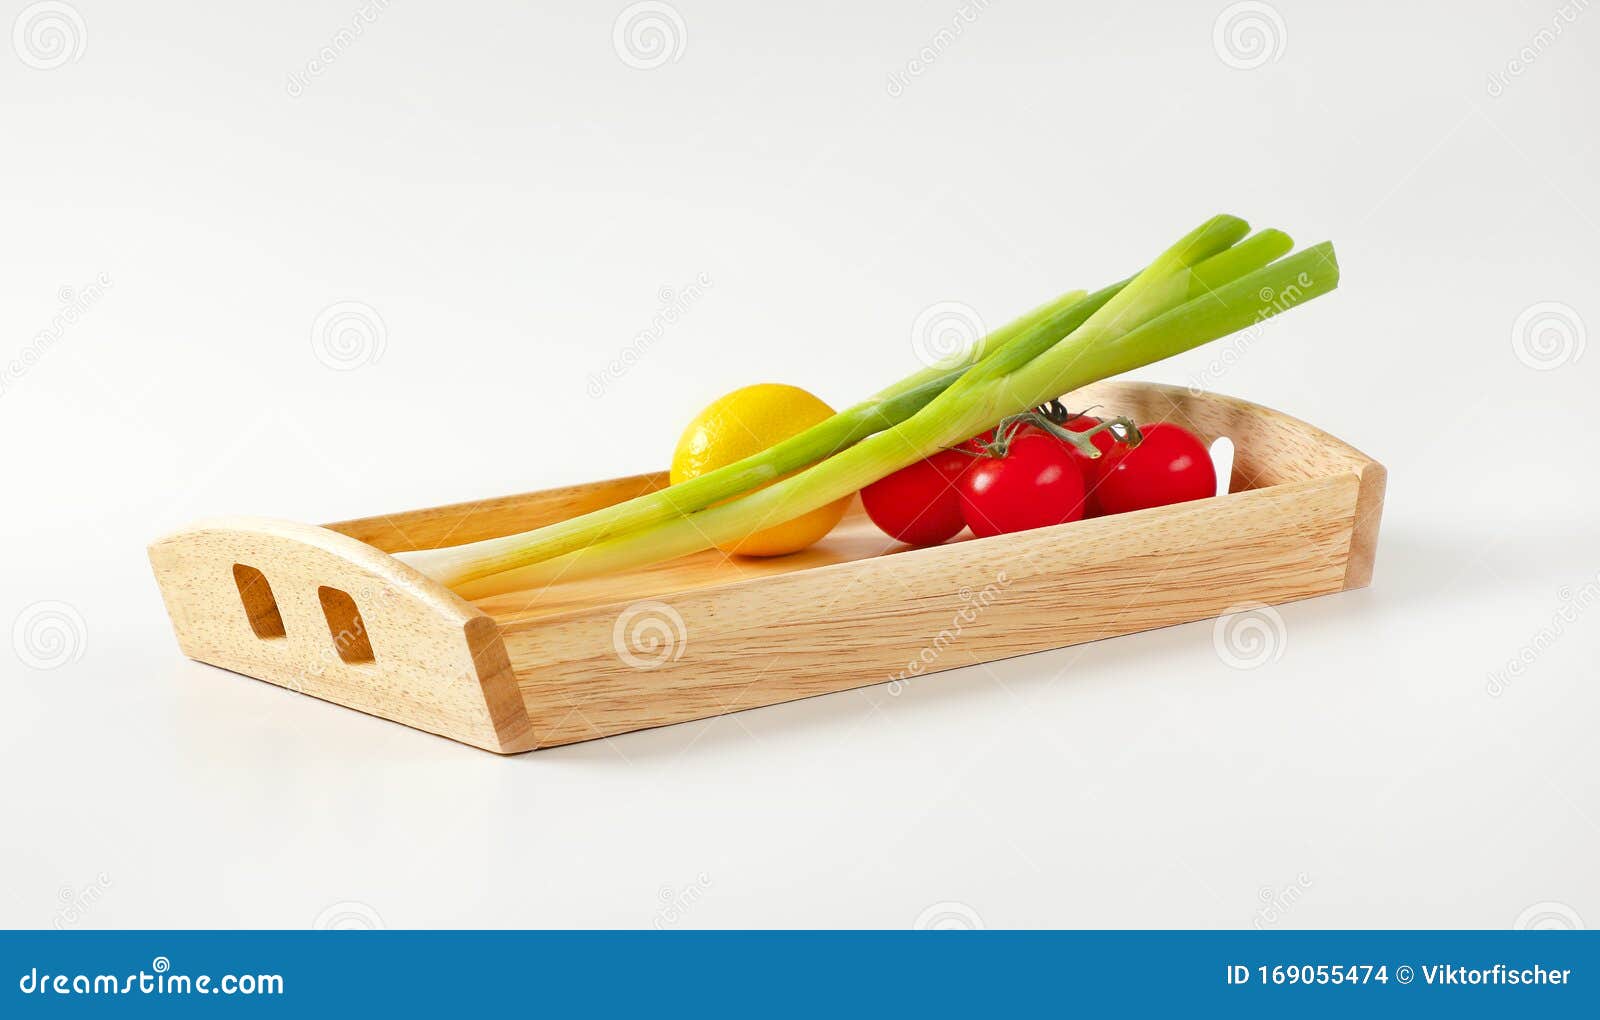 Wooden Serving Tray Wit Fresh Vegetables And Fruit Stock Photo Image Of Fresh Handles 169055474